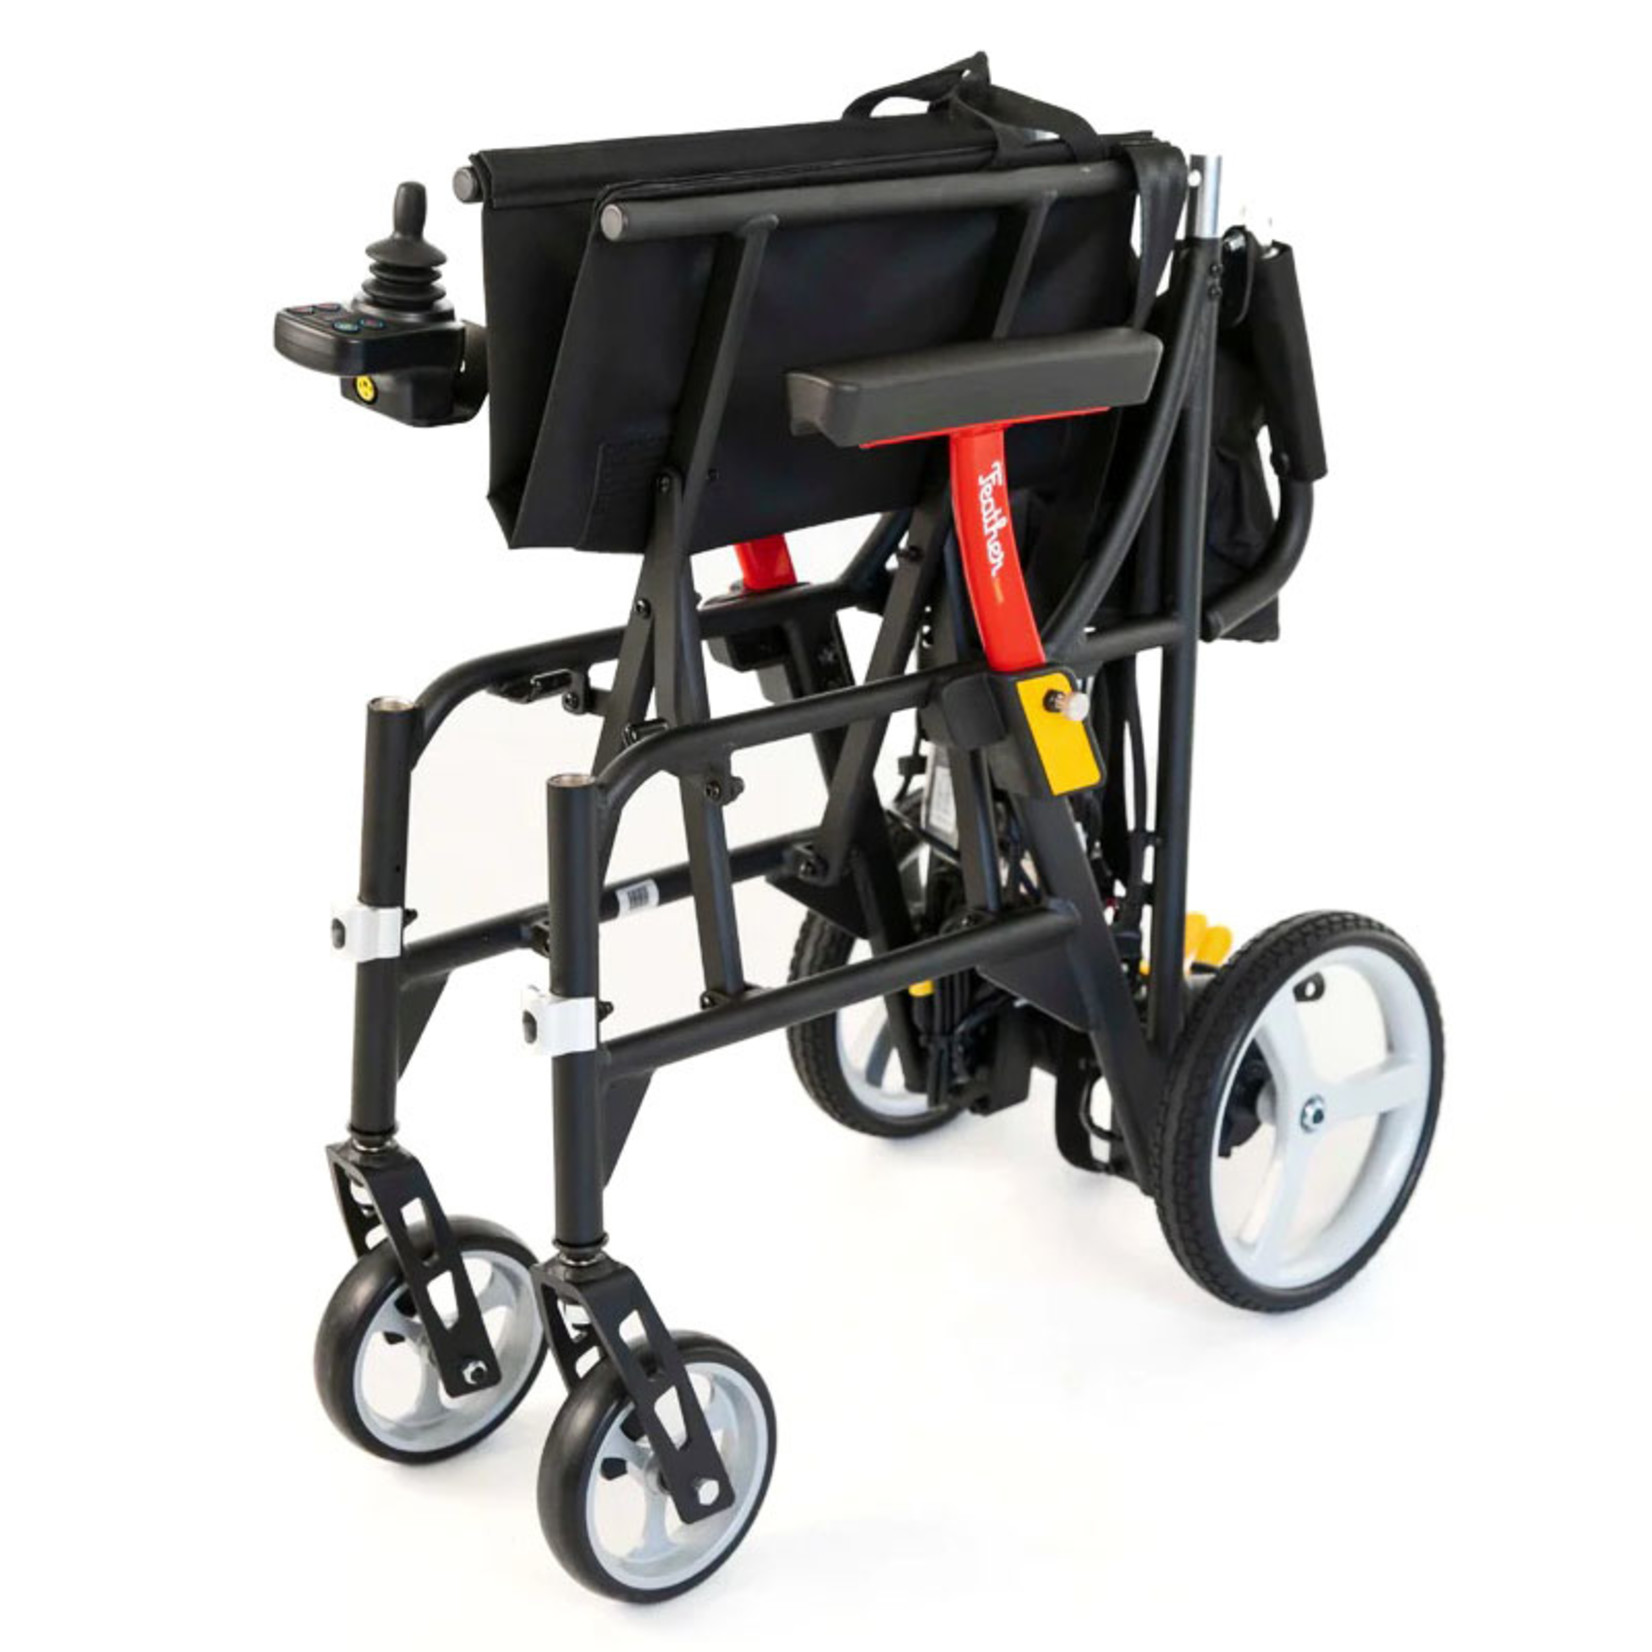 Feather Lite Lite Compact Folding Electric Wheelchair - Texas